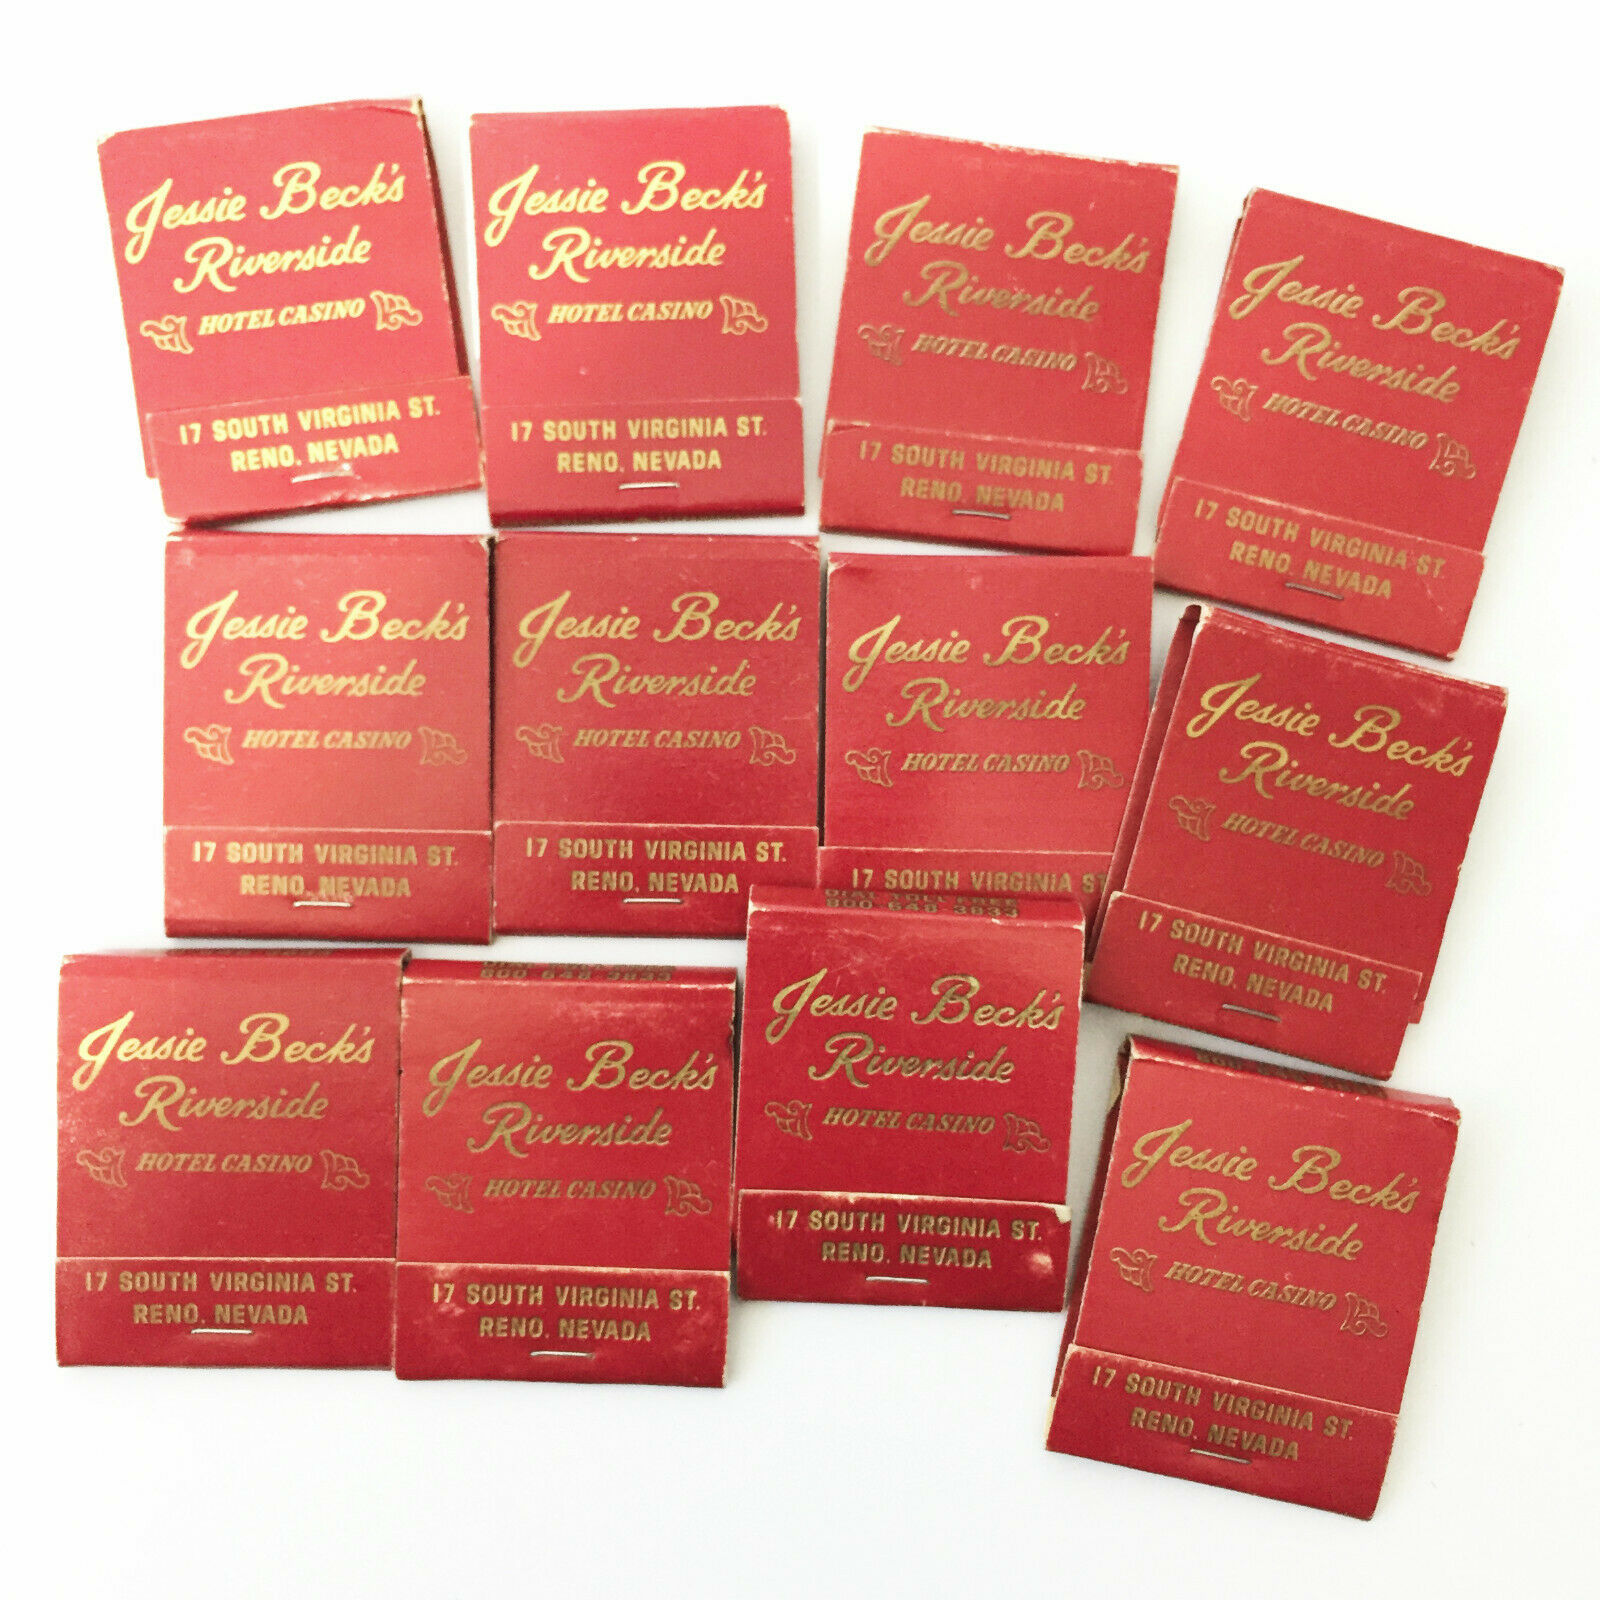 Jessie Beck's Riverside Hotel Casino Reno Matchbook Covers Lot Of 12 Vintage